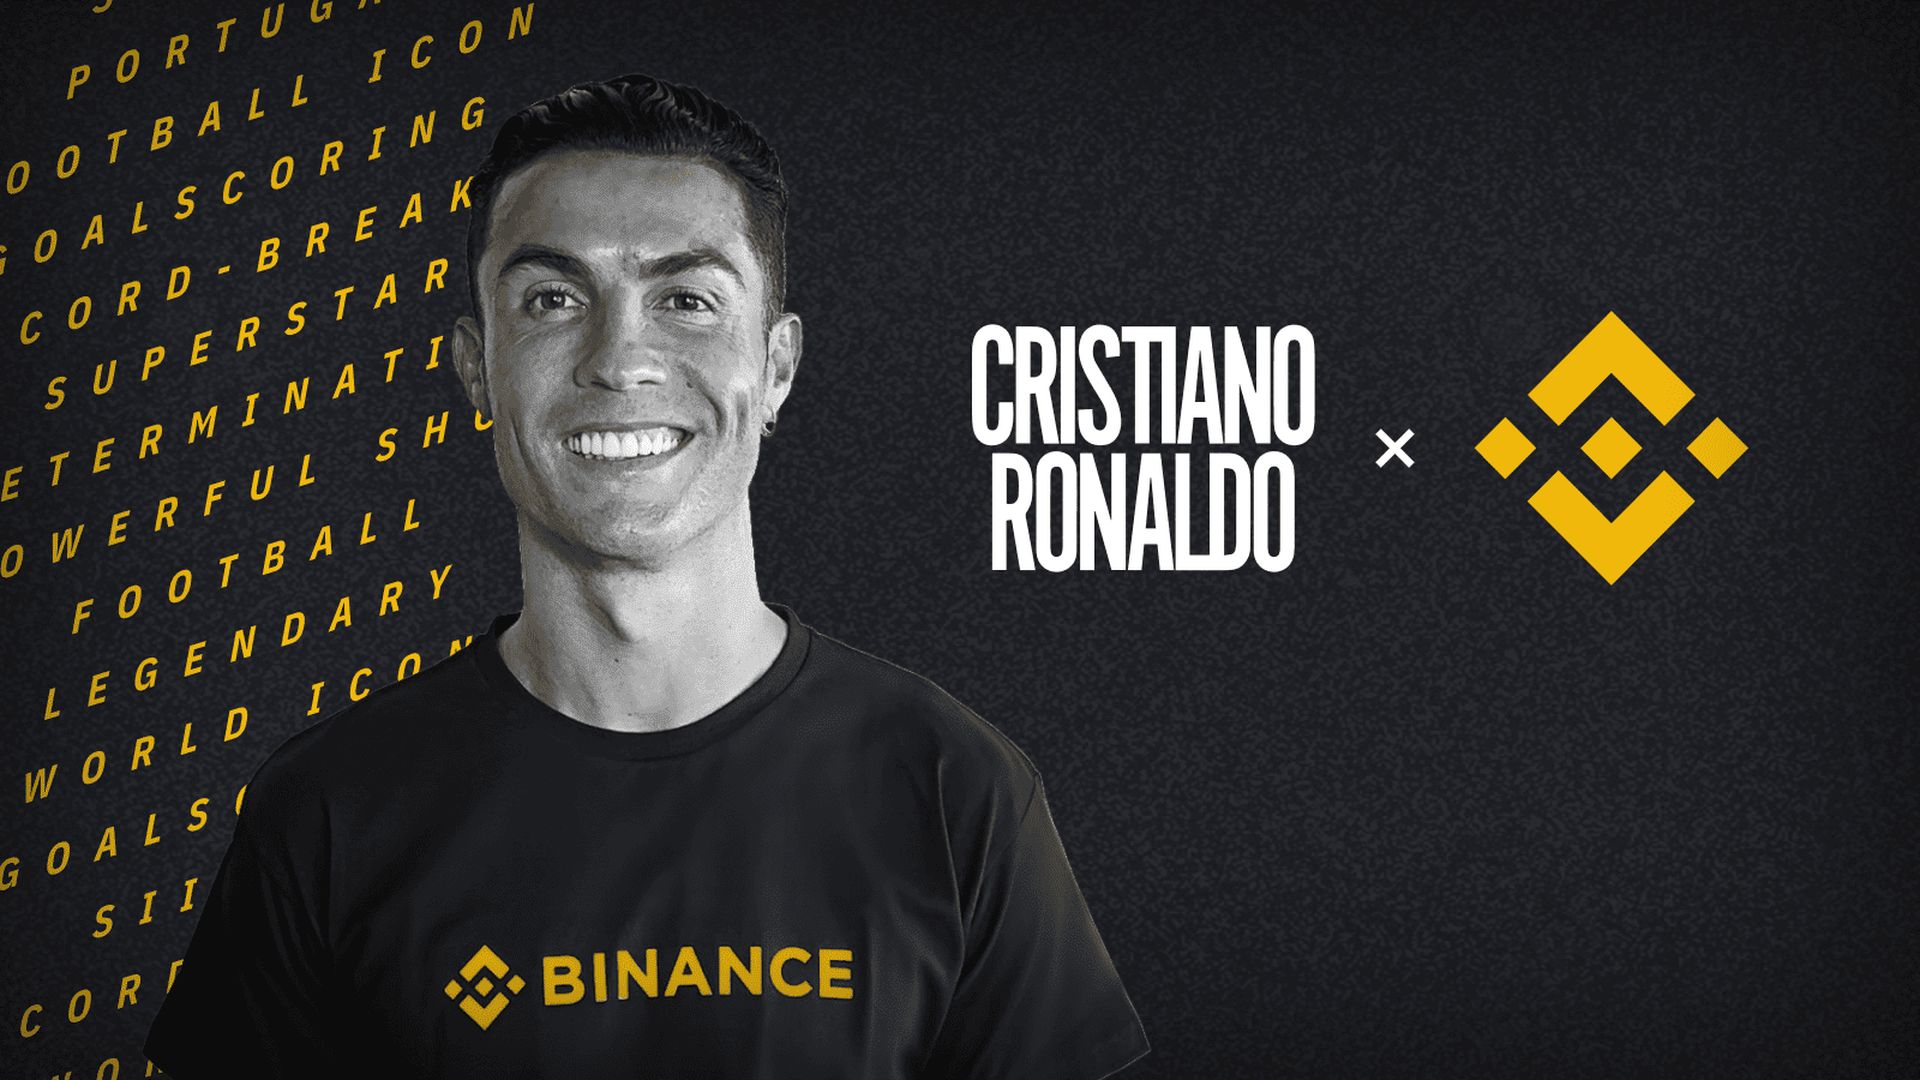 Ronaldo NFT collection will be launched on November 18